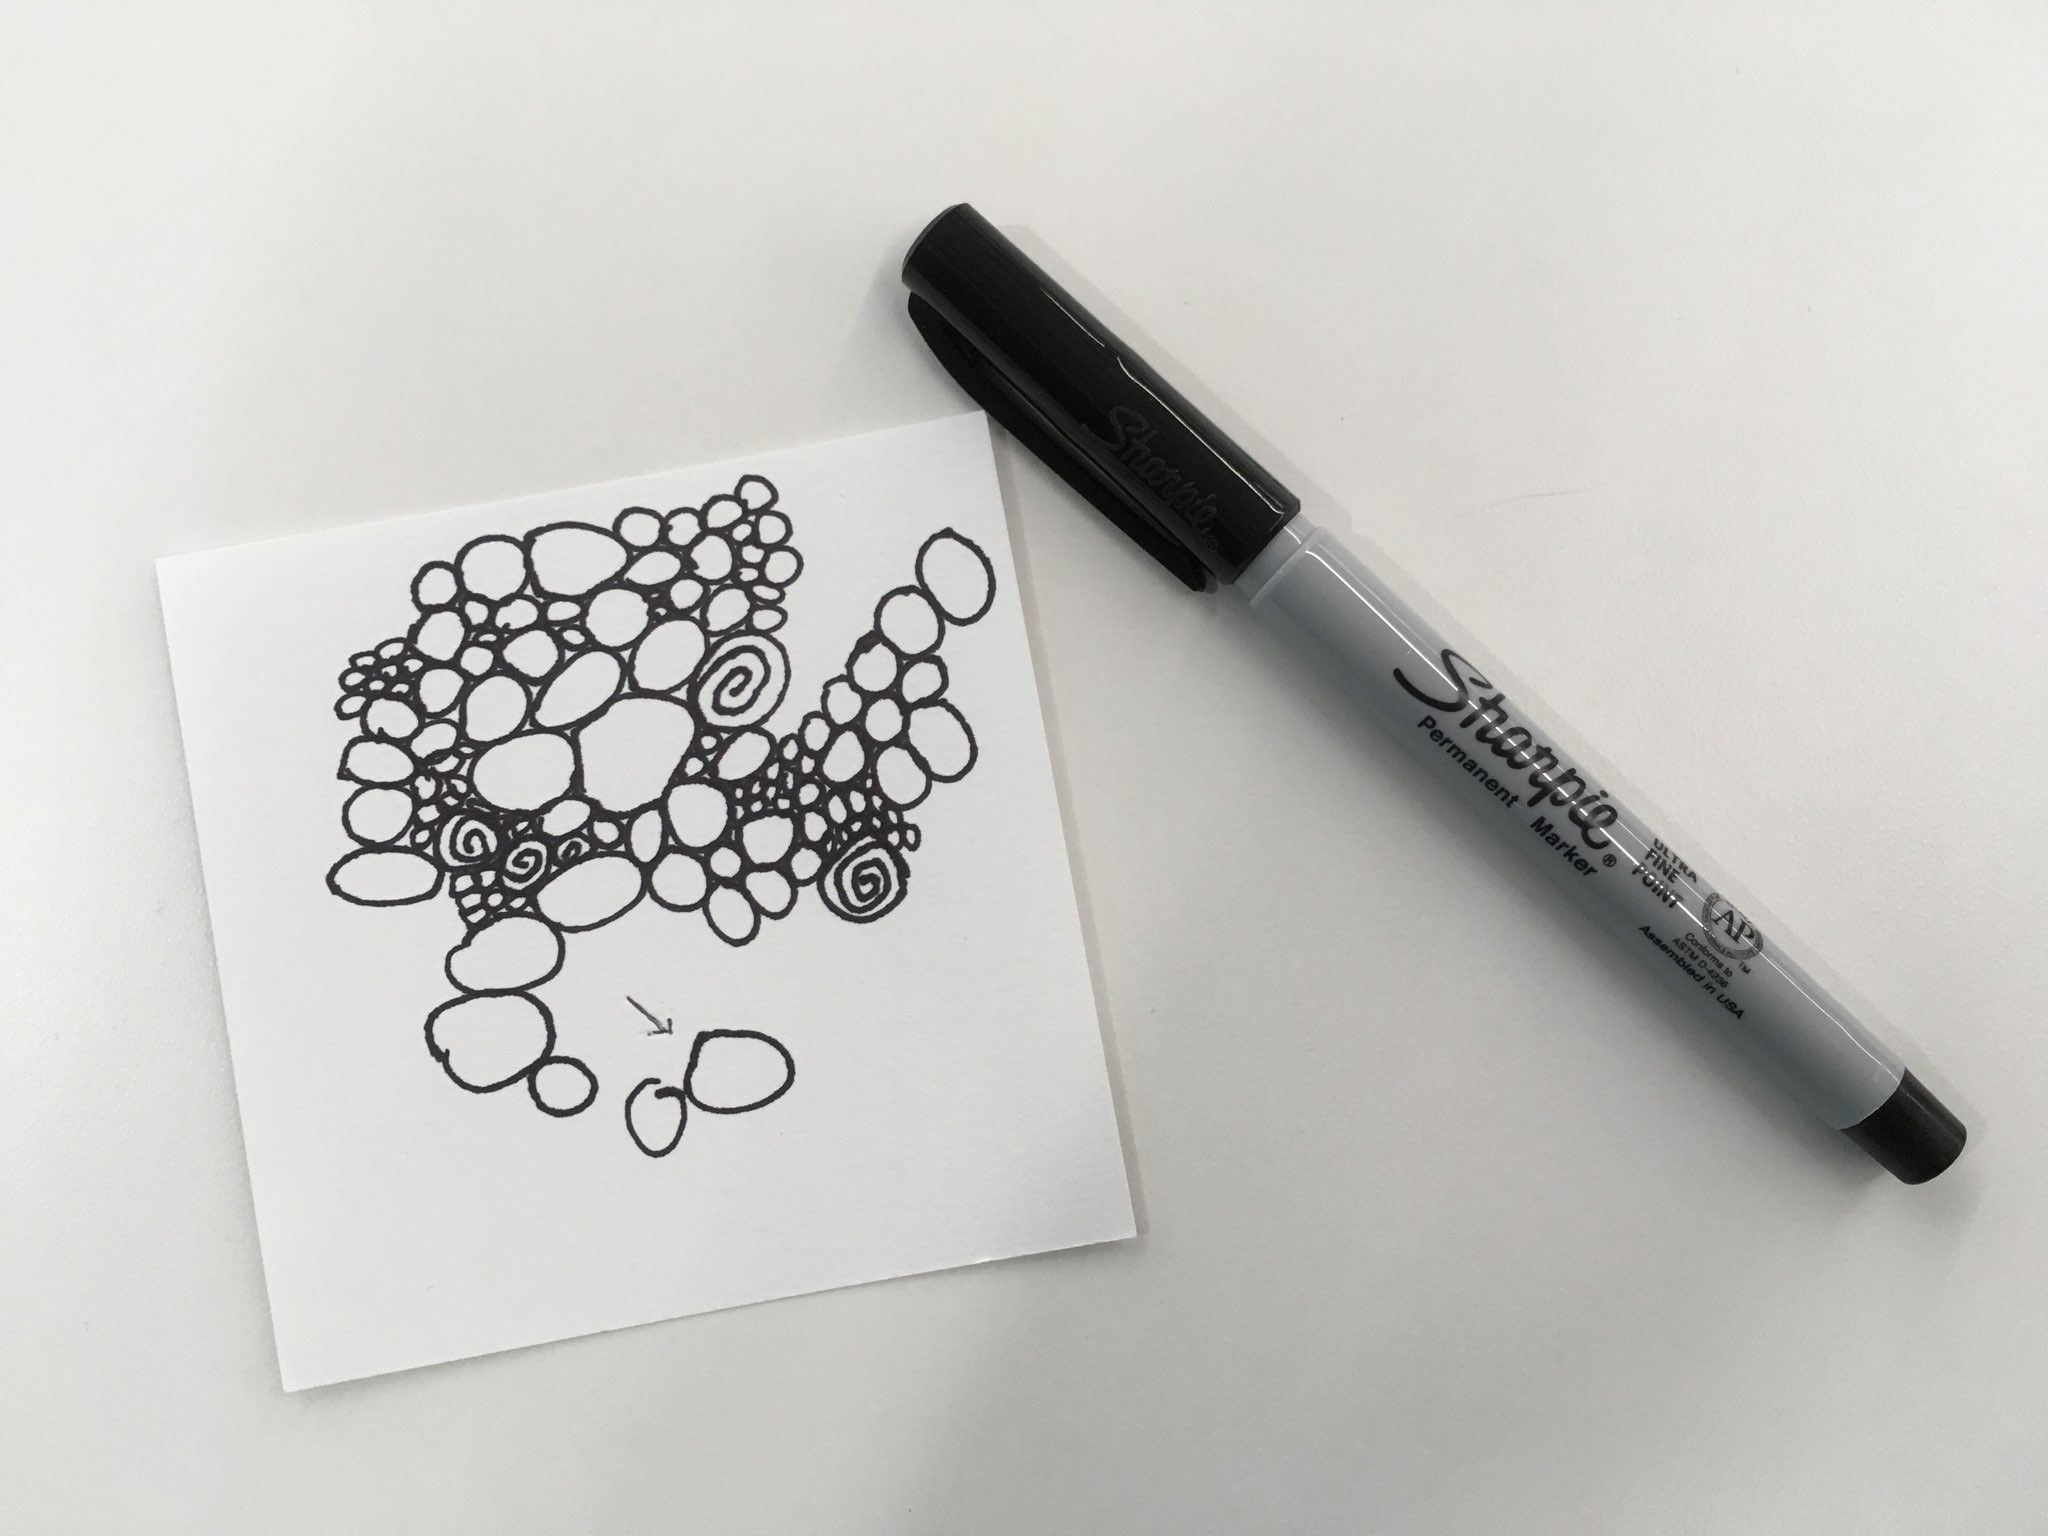 Paper square with more random circles in black ink.